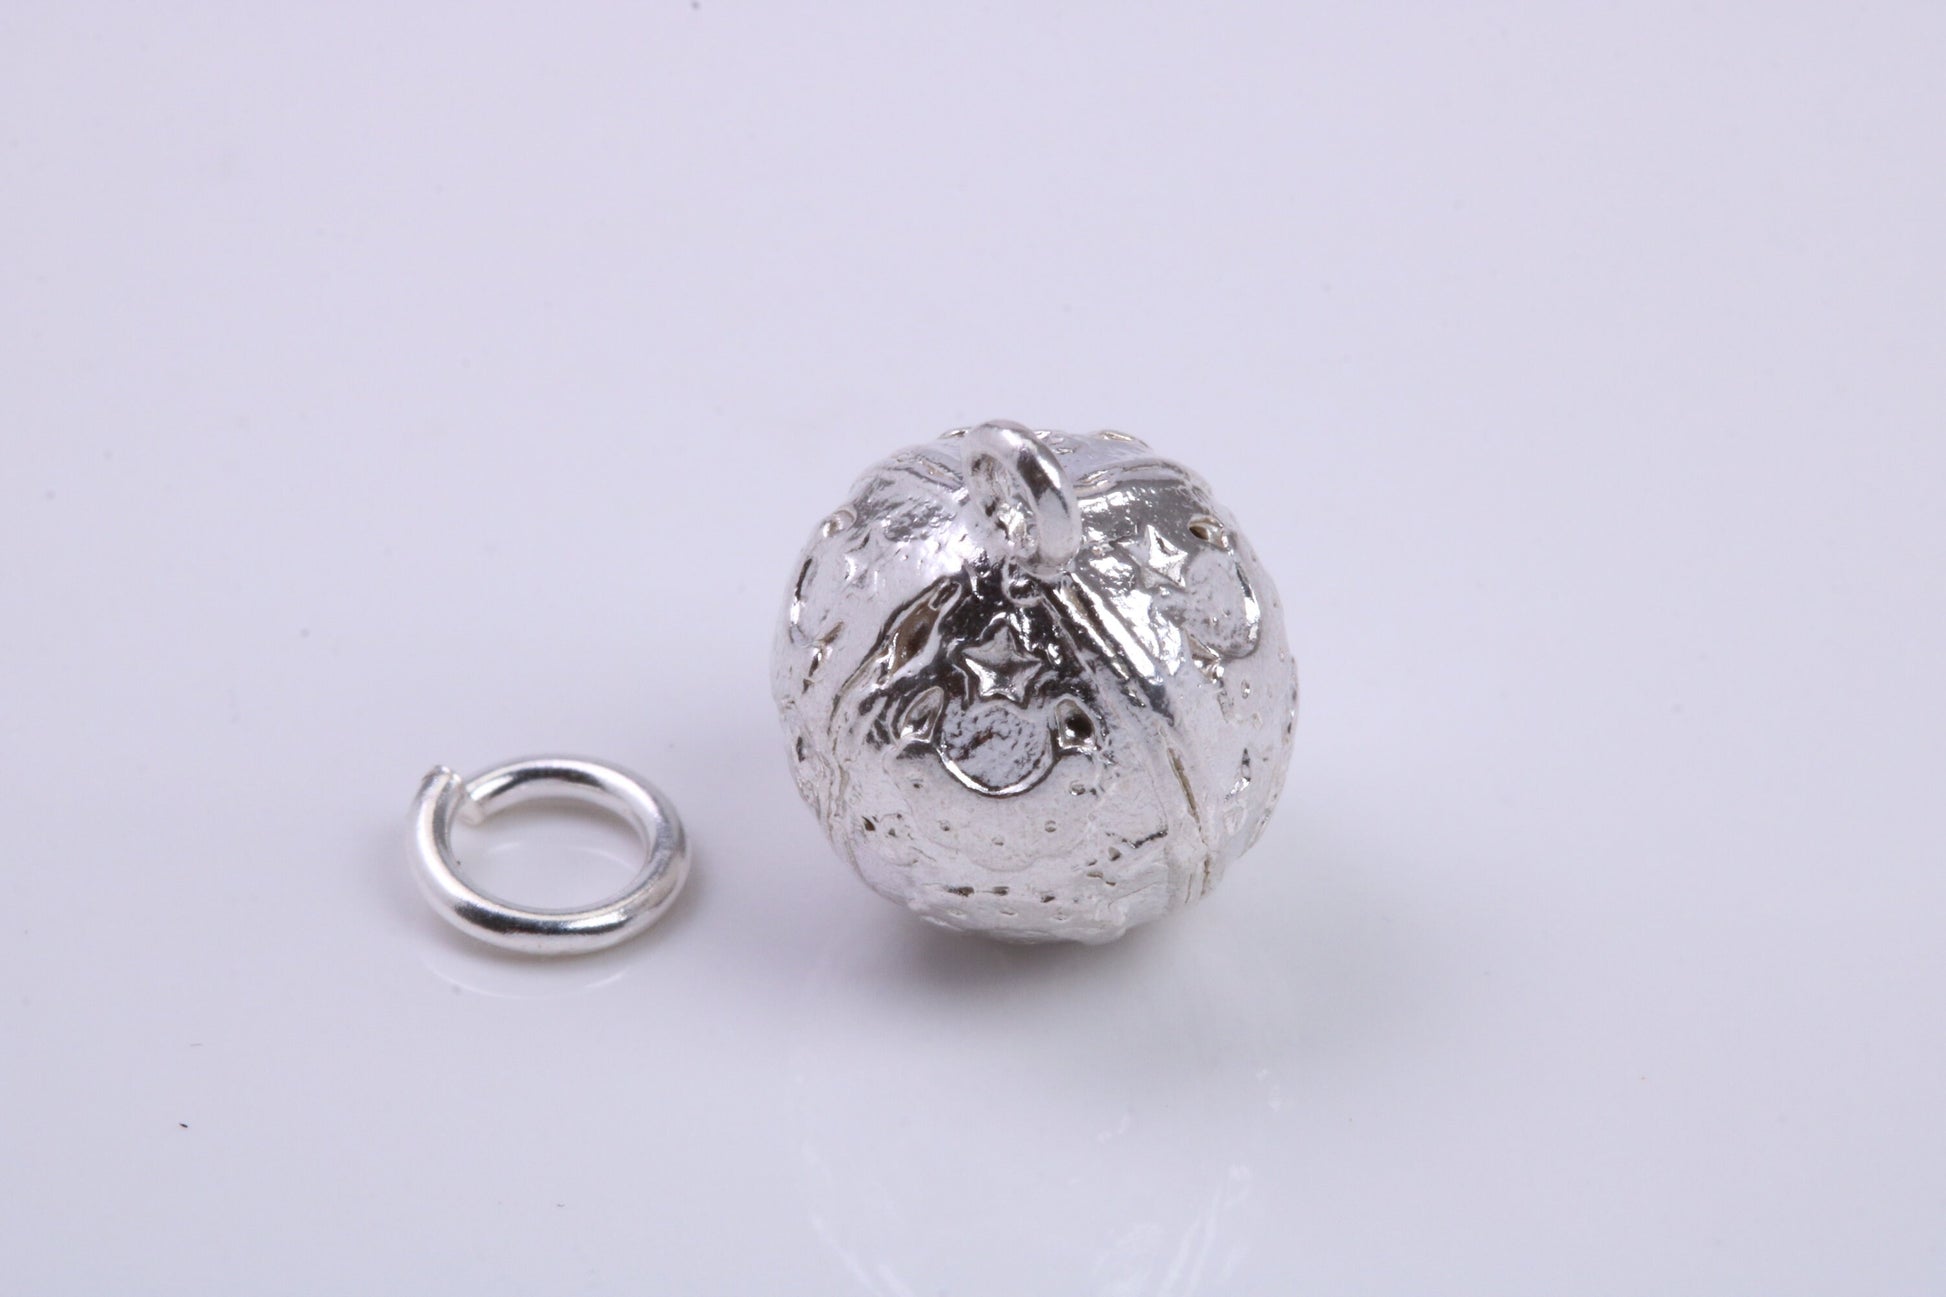 Moon and Star Sphere Charm, Traditional Charm, Made from Solid 925 Grade Sterling Silver, Complete with Attachment Link